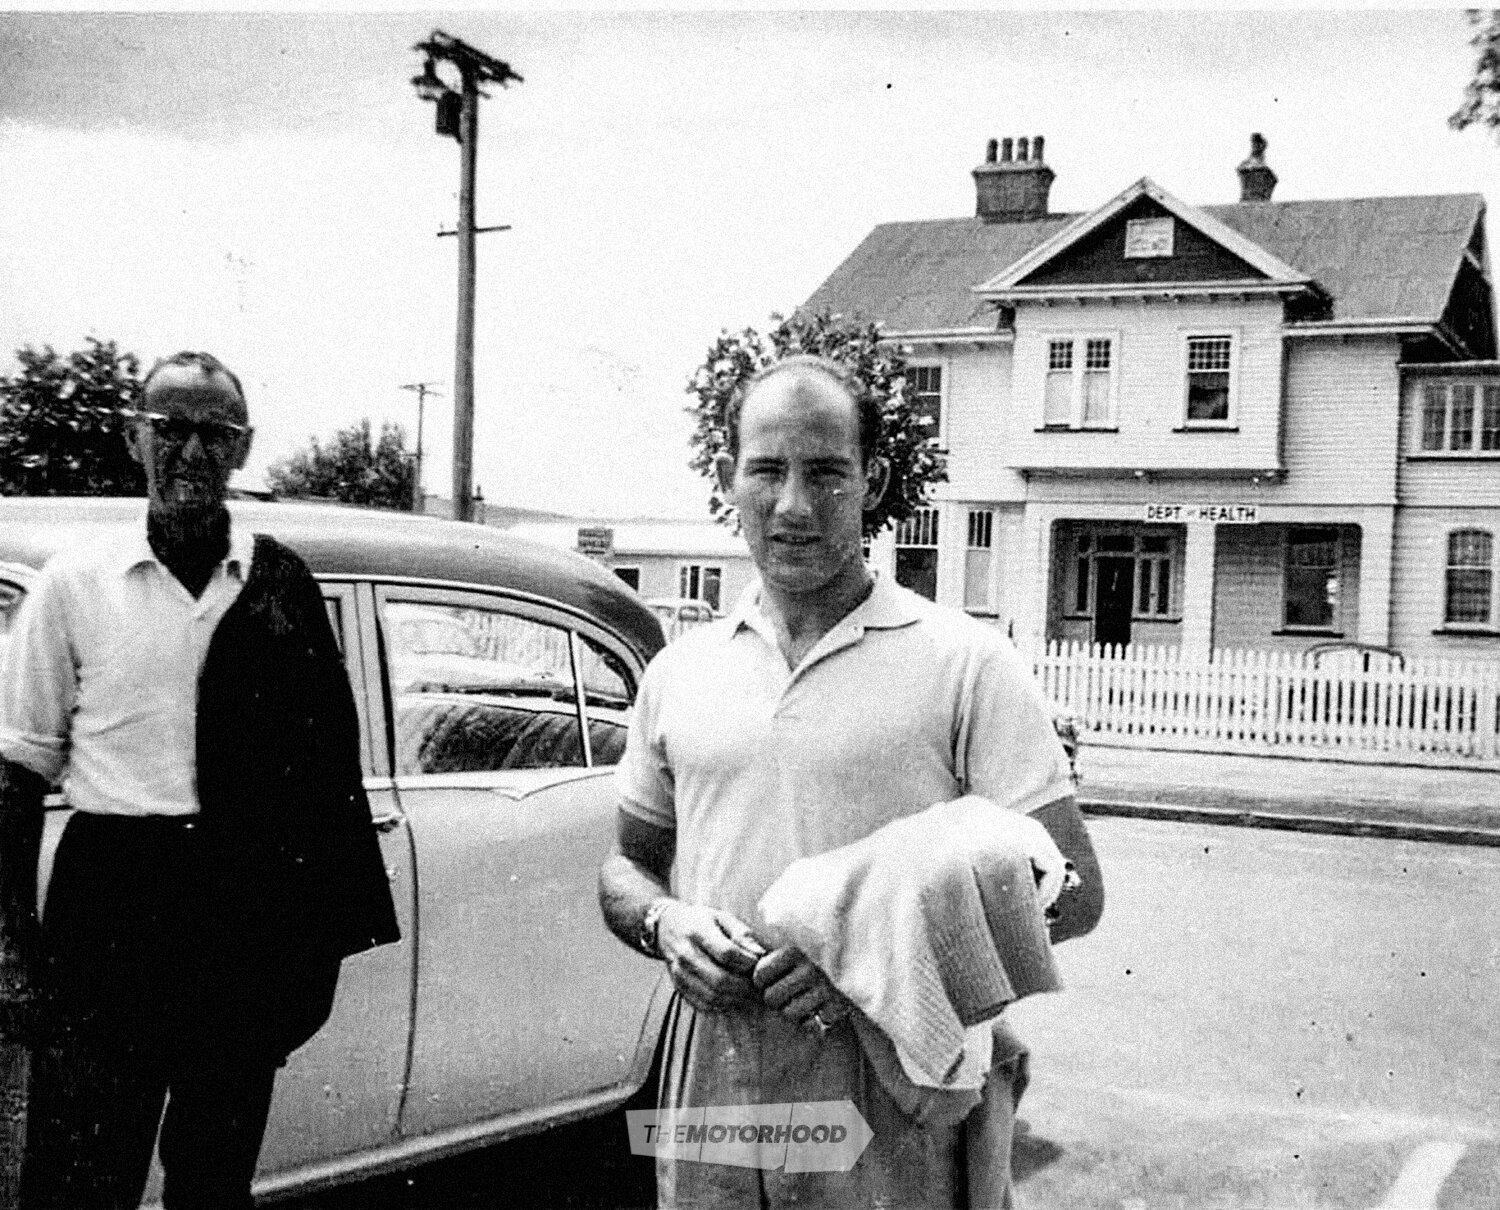 The photo that a young Donn Anderson took with his box Brownie camera at Rotorua in 1959 on his first, nervous meeting with the great man